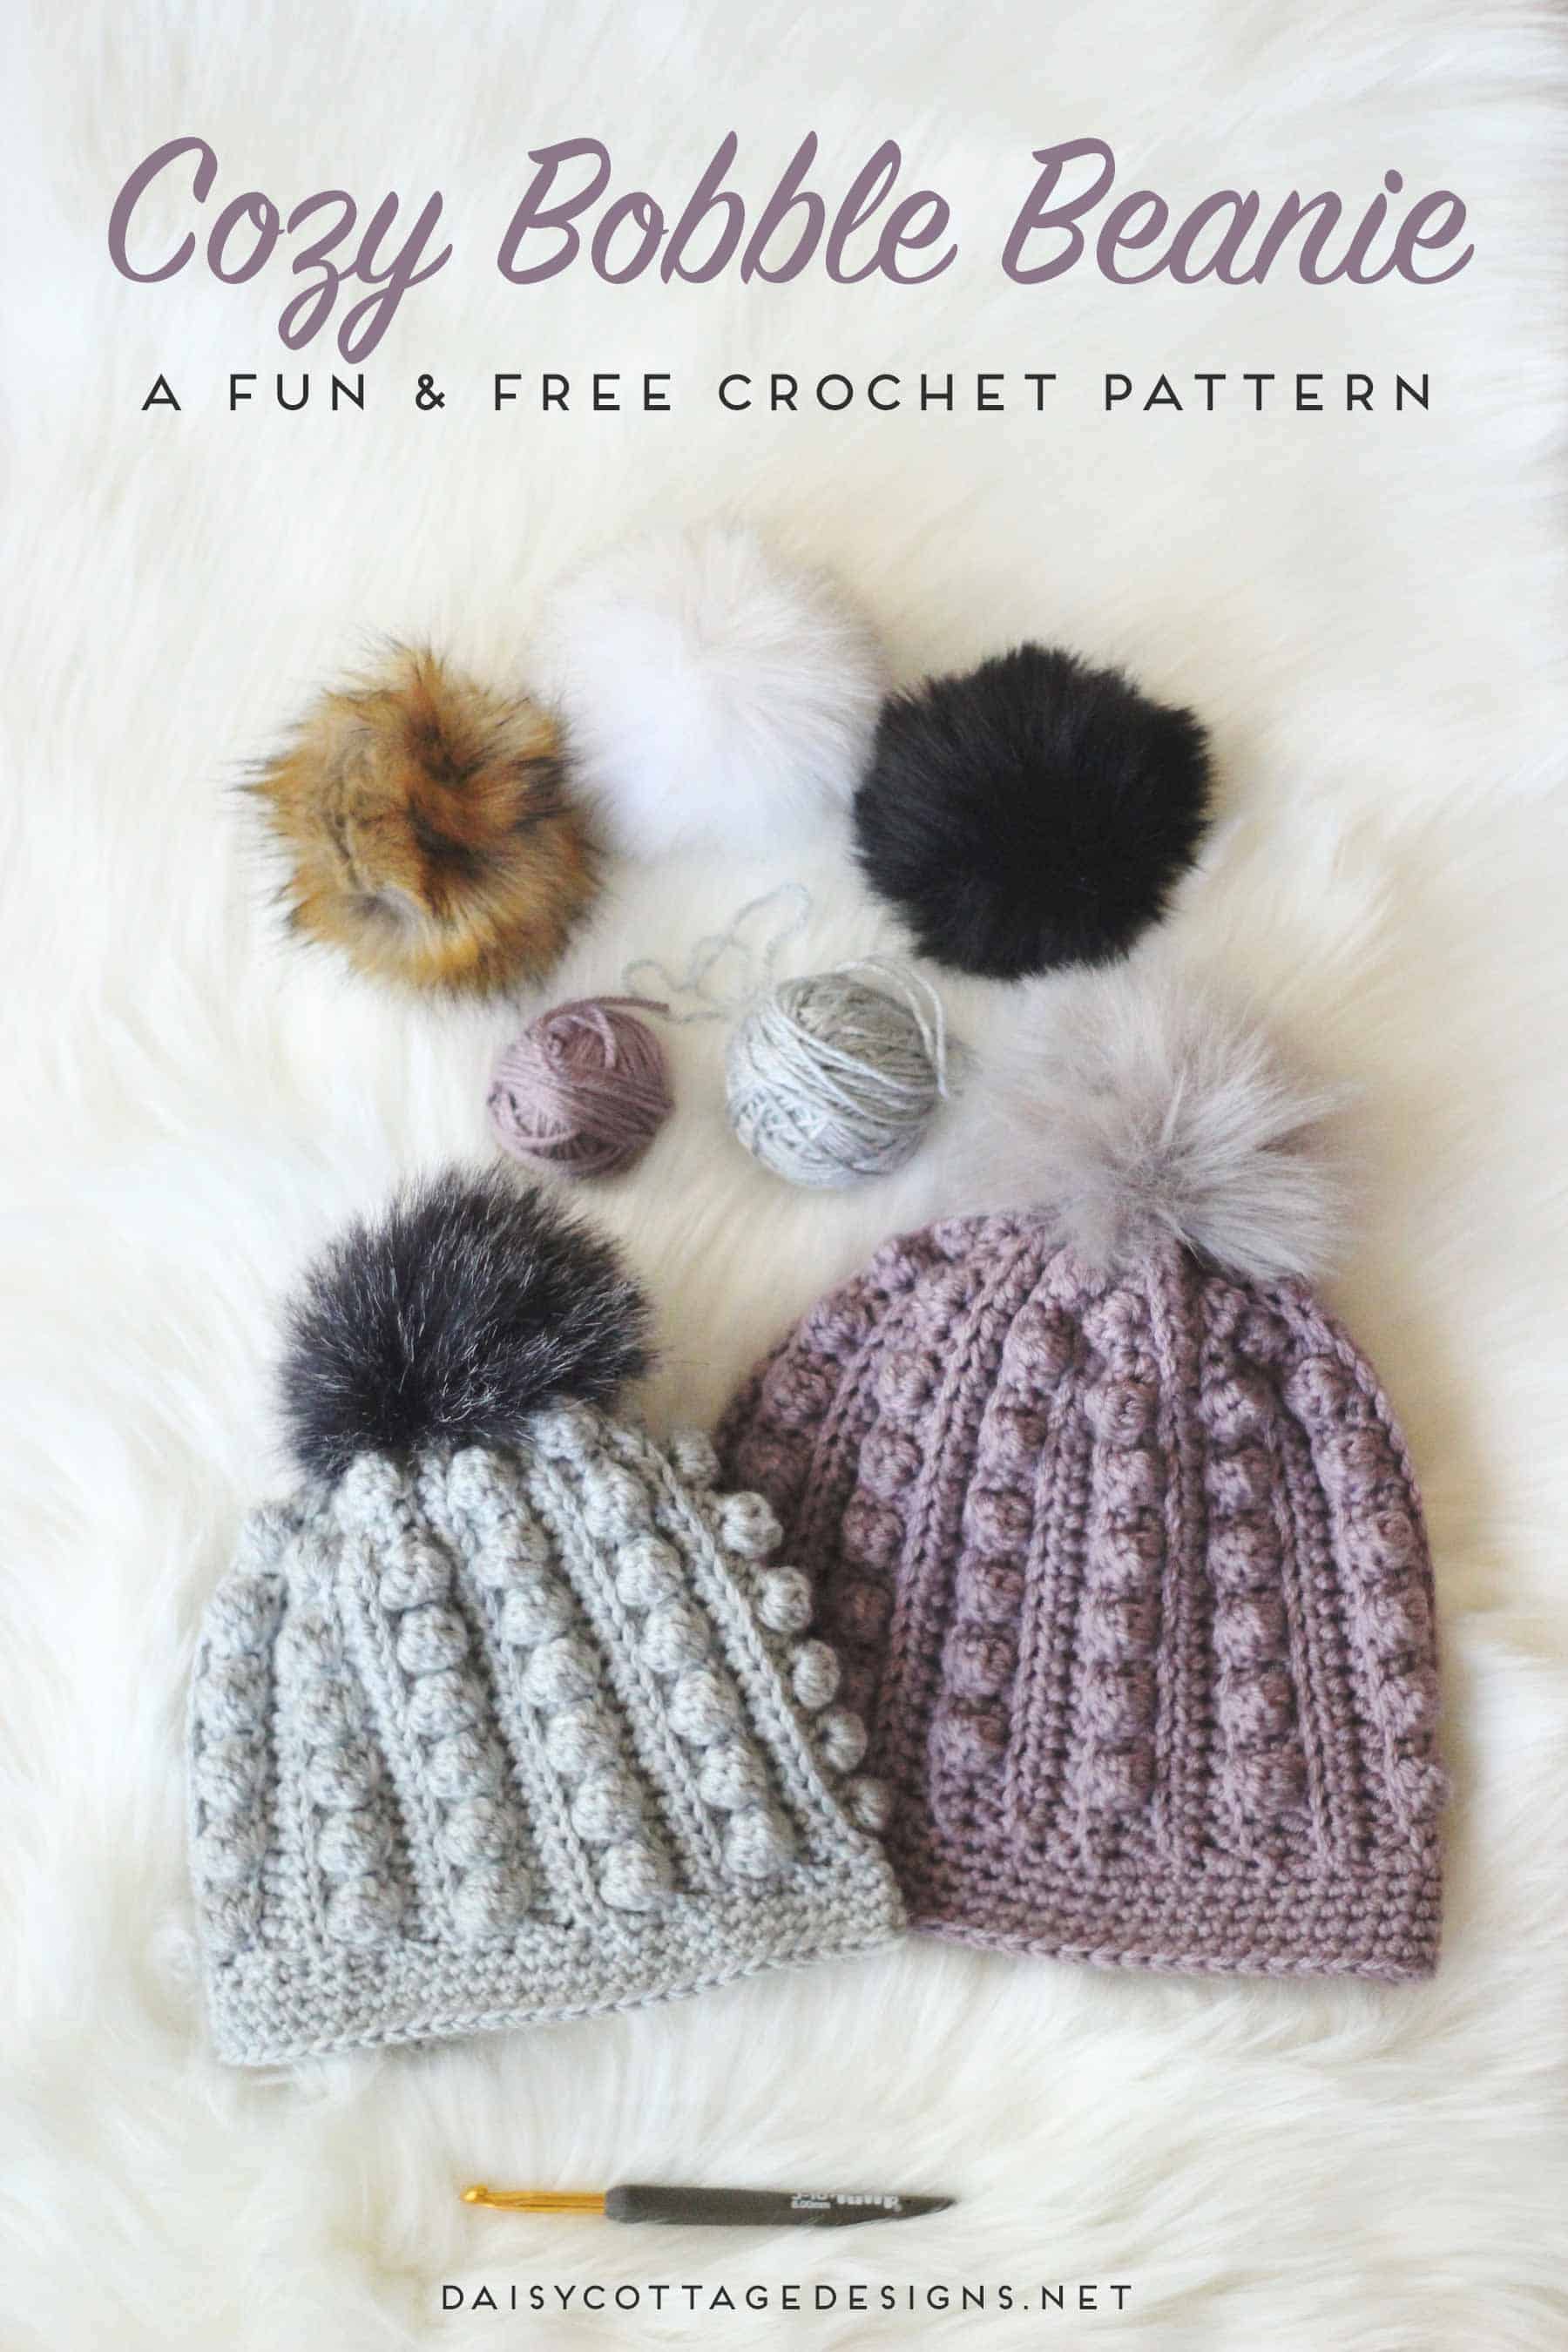 Use this free bobble beanie crochet pattern to create an adorable crochet hat for anyone on your gift list. Cozy and warm, it's the perfect winter hat. | bobble toboggan, Daisy Cottage Designs, free crochet pattern, free hat crochet pattern, crochet hat pattern free, bobble beanie